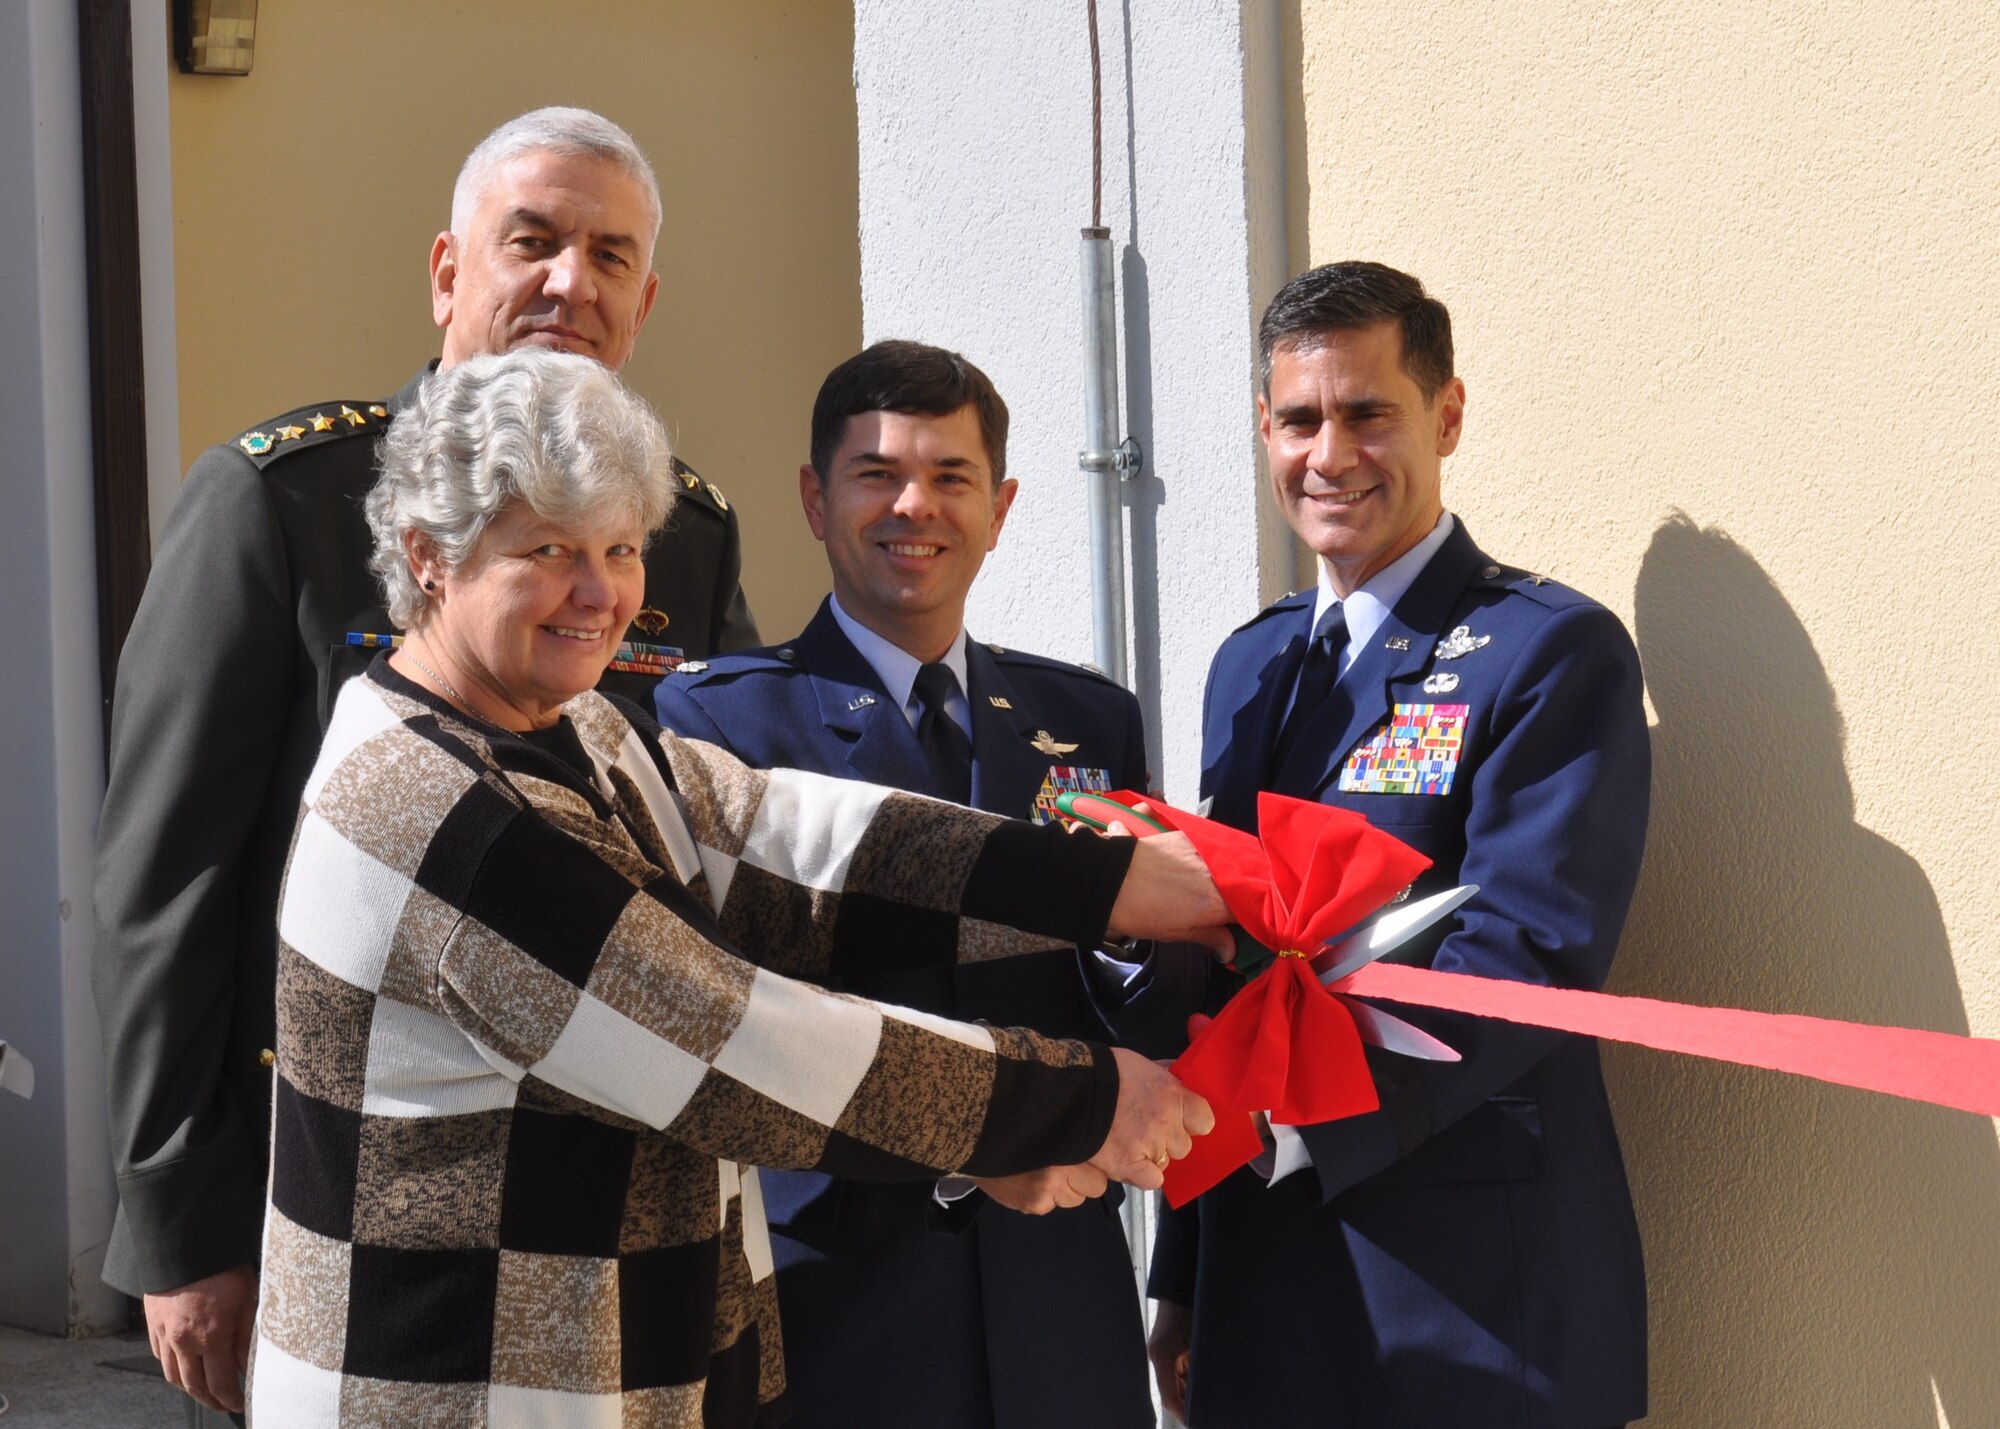 Representatives of the U.S. Air Force, Turkish Air Force and U.S. Army Corps of Engineers prepare to cut the ribbon during the grand opening of the new administrative building March 26, 2015, at the Ankara Support Facility in Turkey.  This new building, number 2621, is located adjacent to the Base Exchange. (U.S. Air Force photo by Capt. Laura Balch/Released)